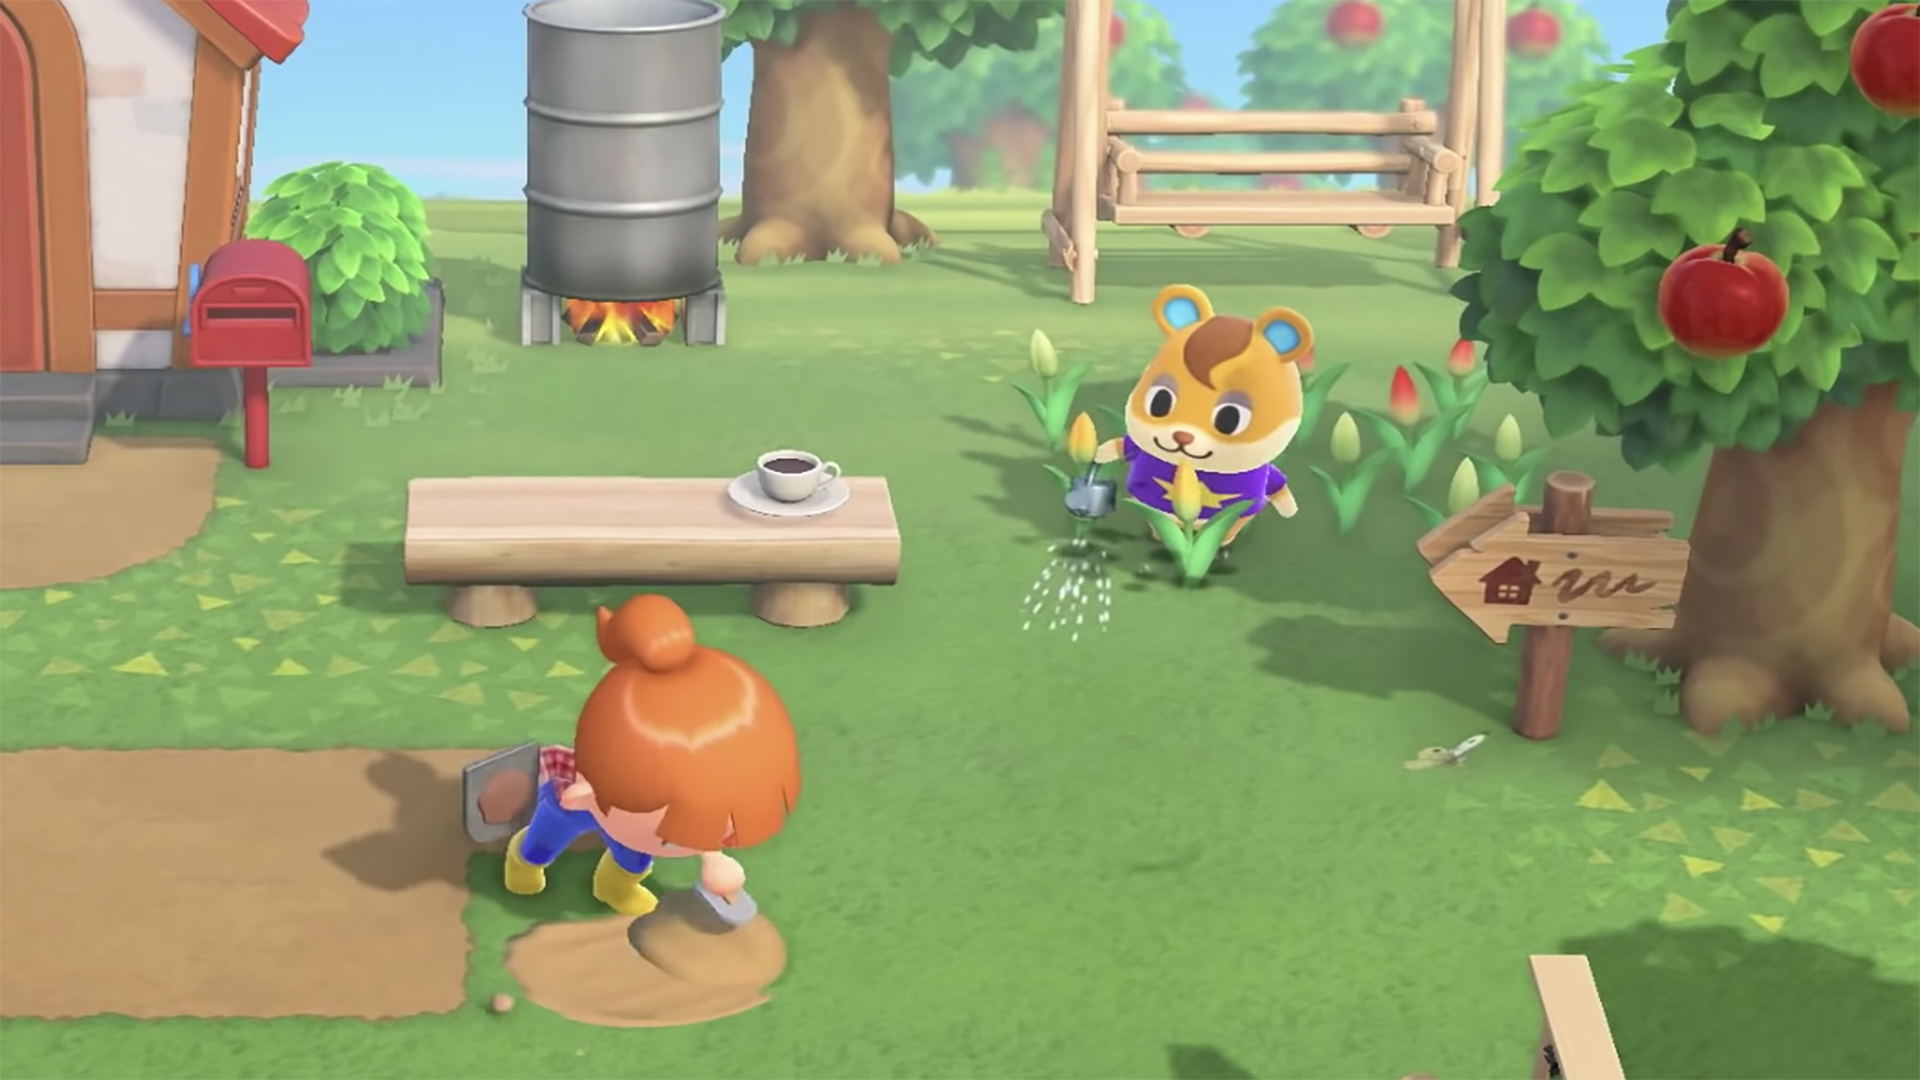 Here's what time you can start playing Animal Crossing: New Horizons